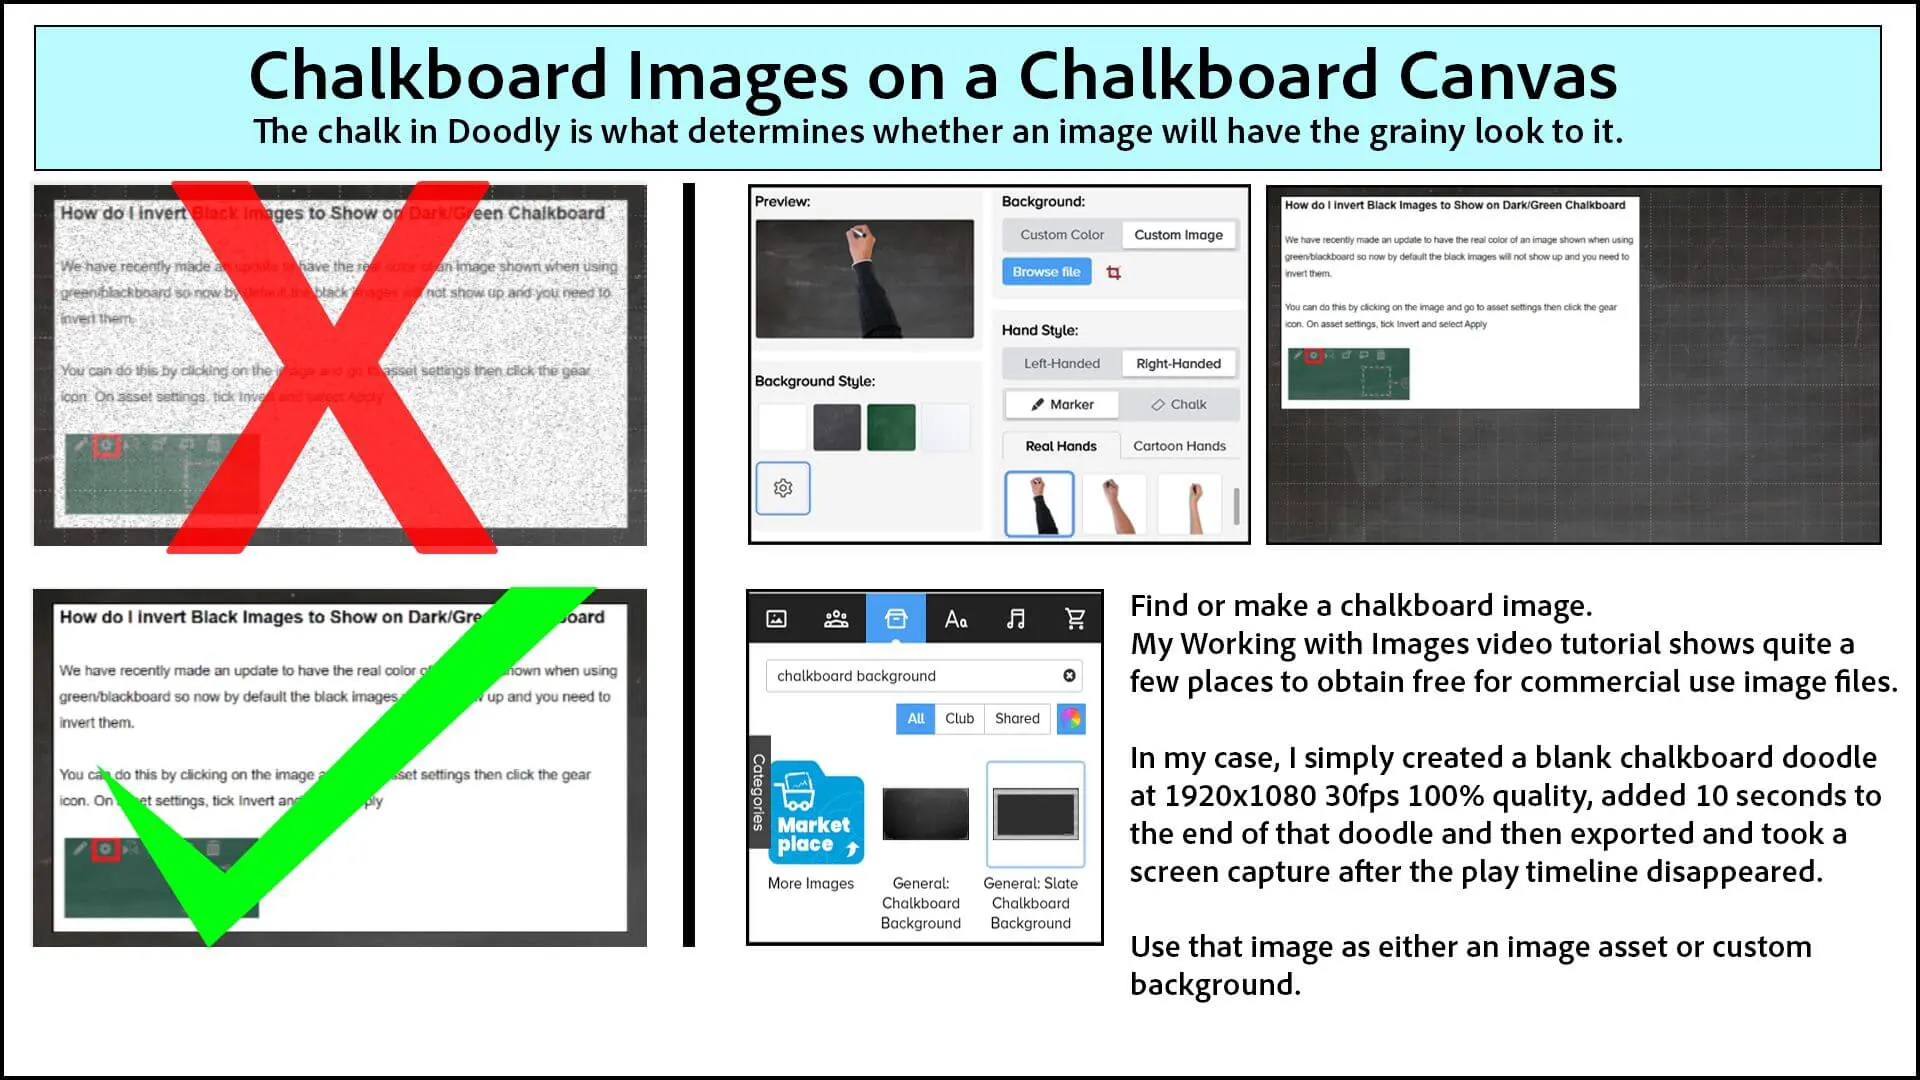 Illustration showing how to have clear images on a chalkboard background in Doodly.